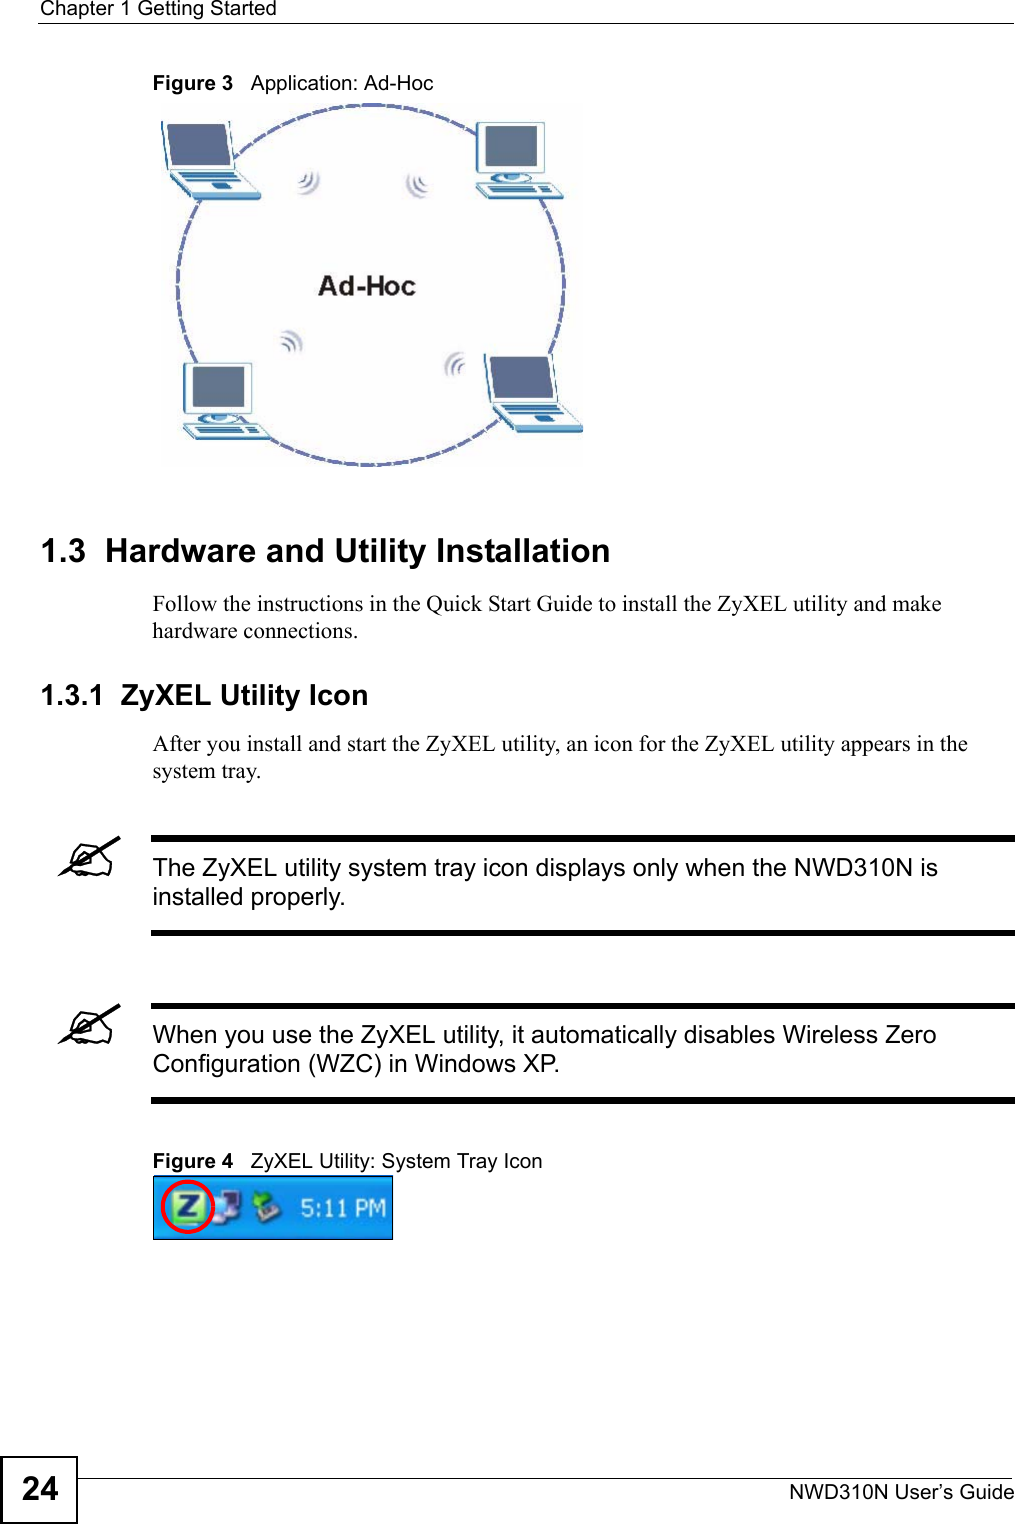 Chapter 1 Getting StartedNWD310N User’s Guide24Figure 3   Application: Ad-Hoc 1.3  Hardware and Utility InstallationFollow the instructions in the Quick Start Guide to install the ZyXEL utility and make hardware connections.1.3.1  ZyXEL Utility IconAfter you install and start the ZyXEL utility, an icon for the ZyXEL utility appears in the system tray.&quot;The ZyXEL utility system tray icon displays only when the NWD310N is installed properly.&quot;When you use the ZyXEL utility, it automatically disables Wireless Zero Configuration (WZC) in Windows XP.Figure 4   ZyXEL Utility: System Tray Icon 